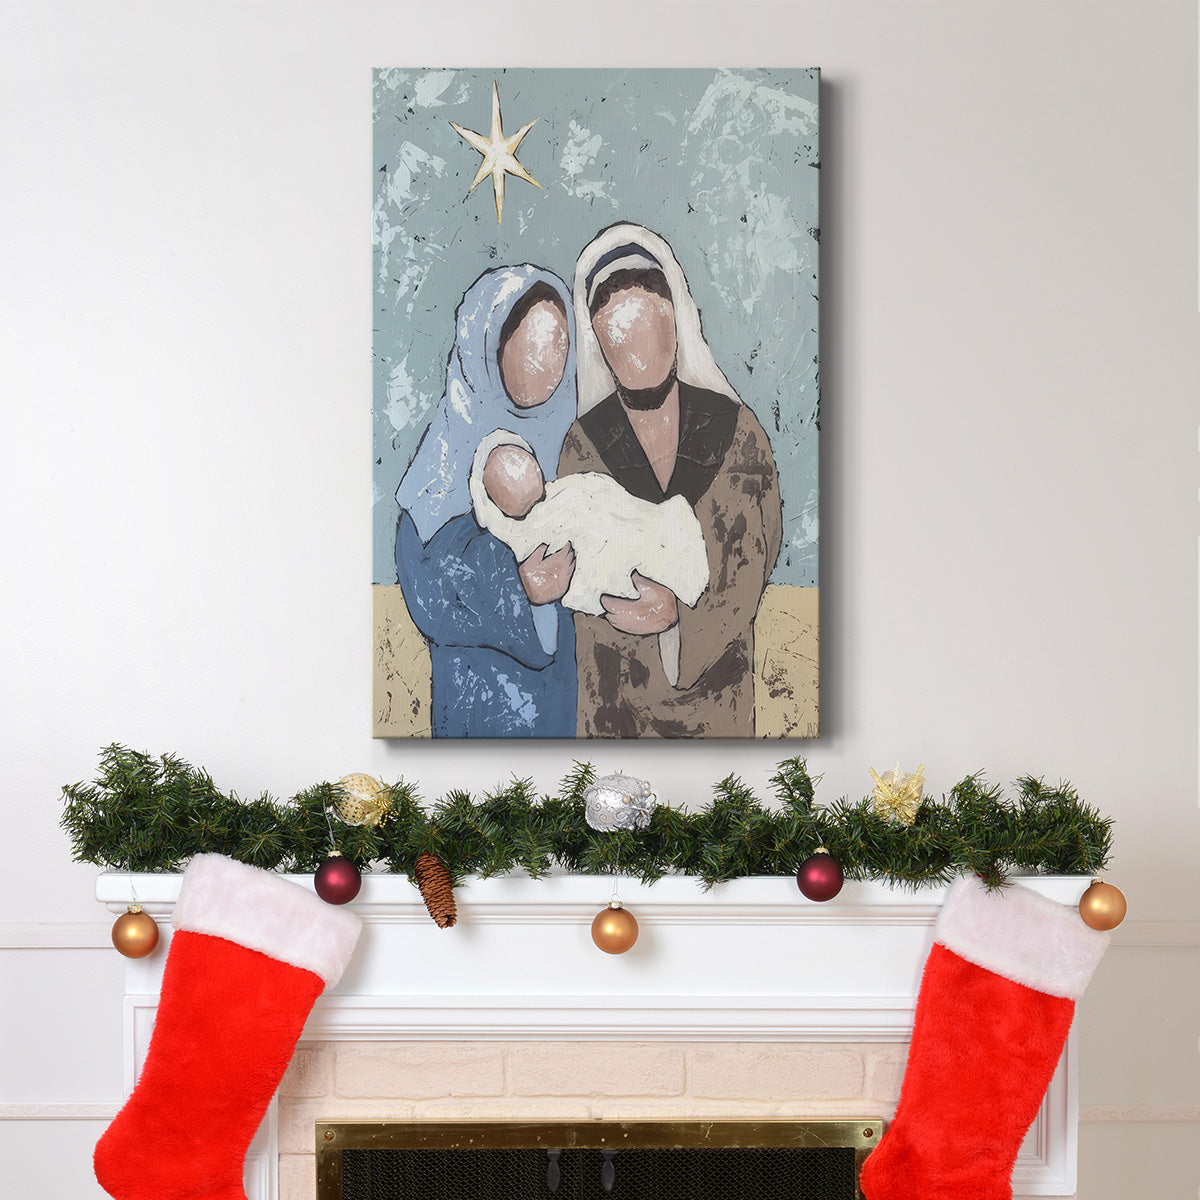 A Silent Night I - Gallery Wrapped Canvas